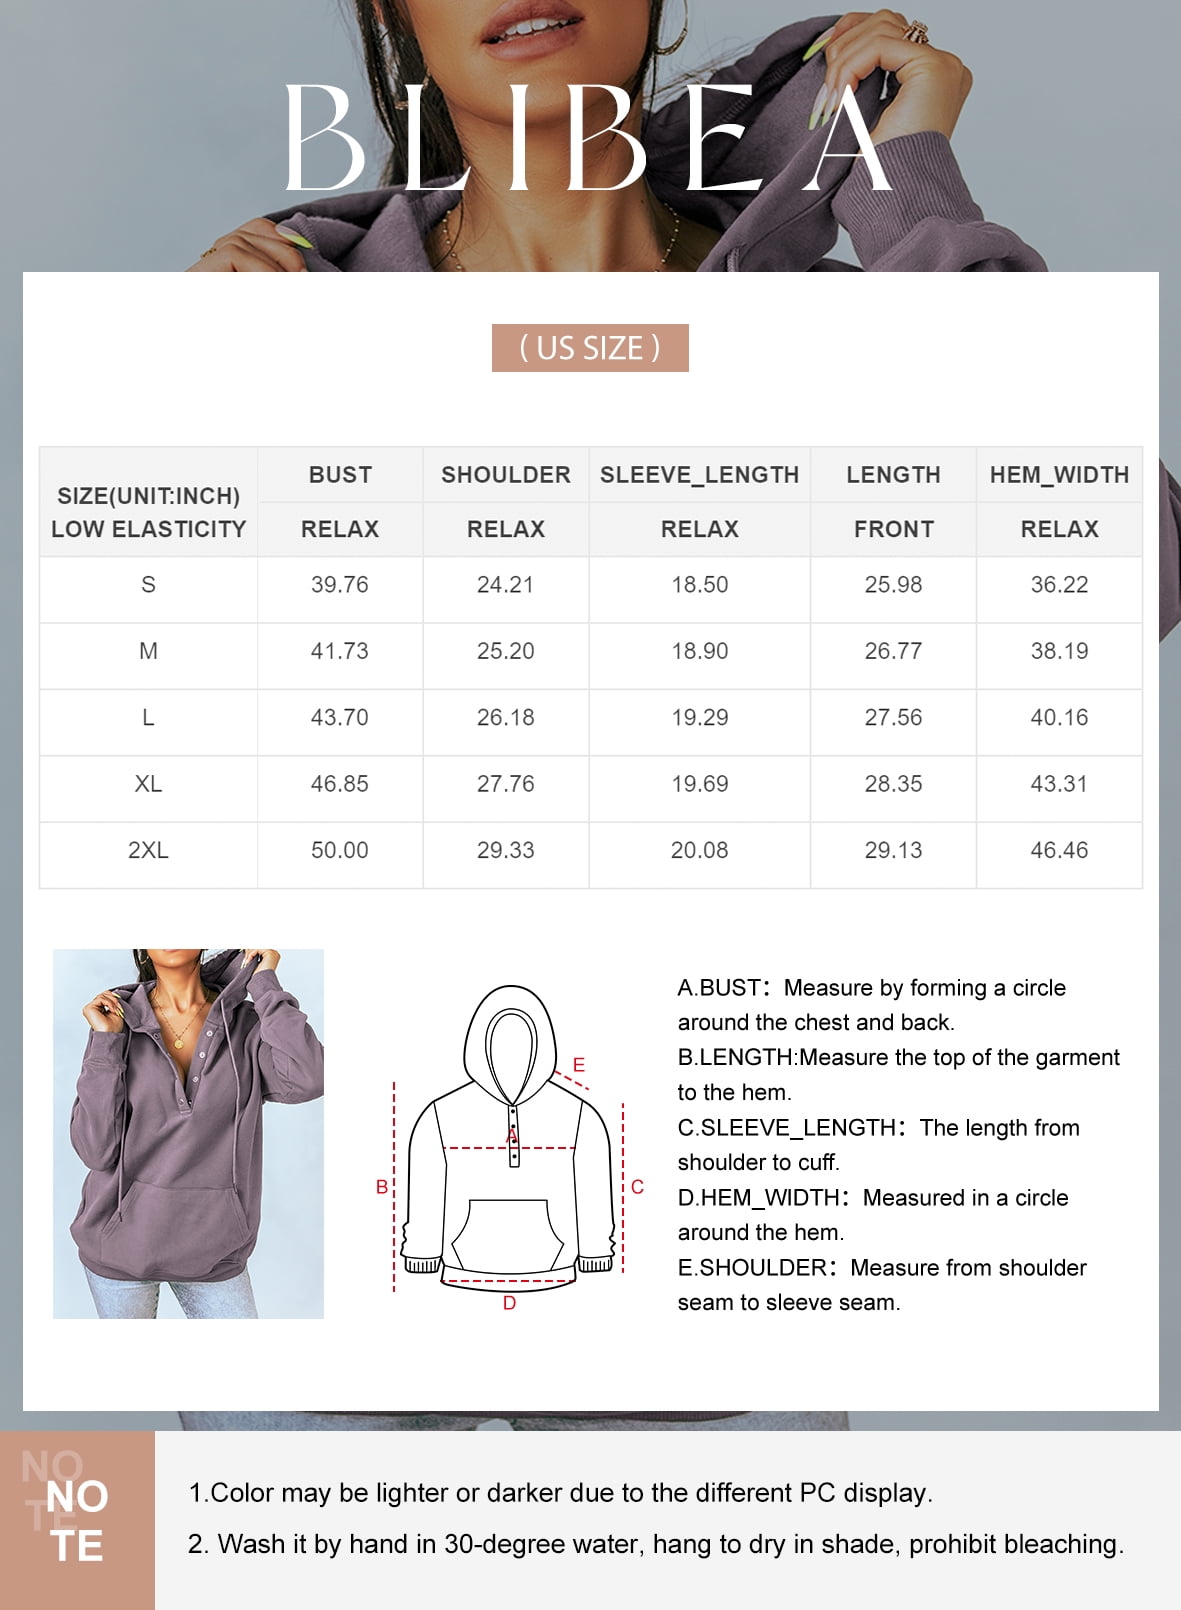 Blibea Women's Hoodie Sweatshirt Long Sleeve 1/4 Button Closure Drawstring Pullover Hooded Tops - image 3 of 8